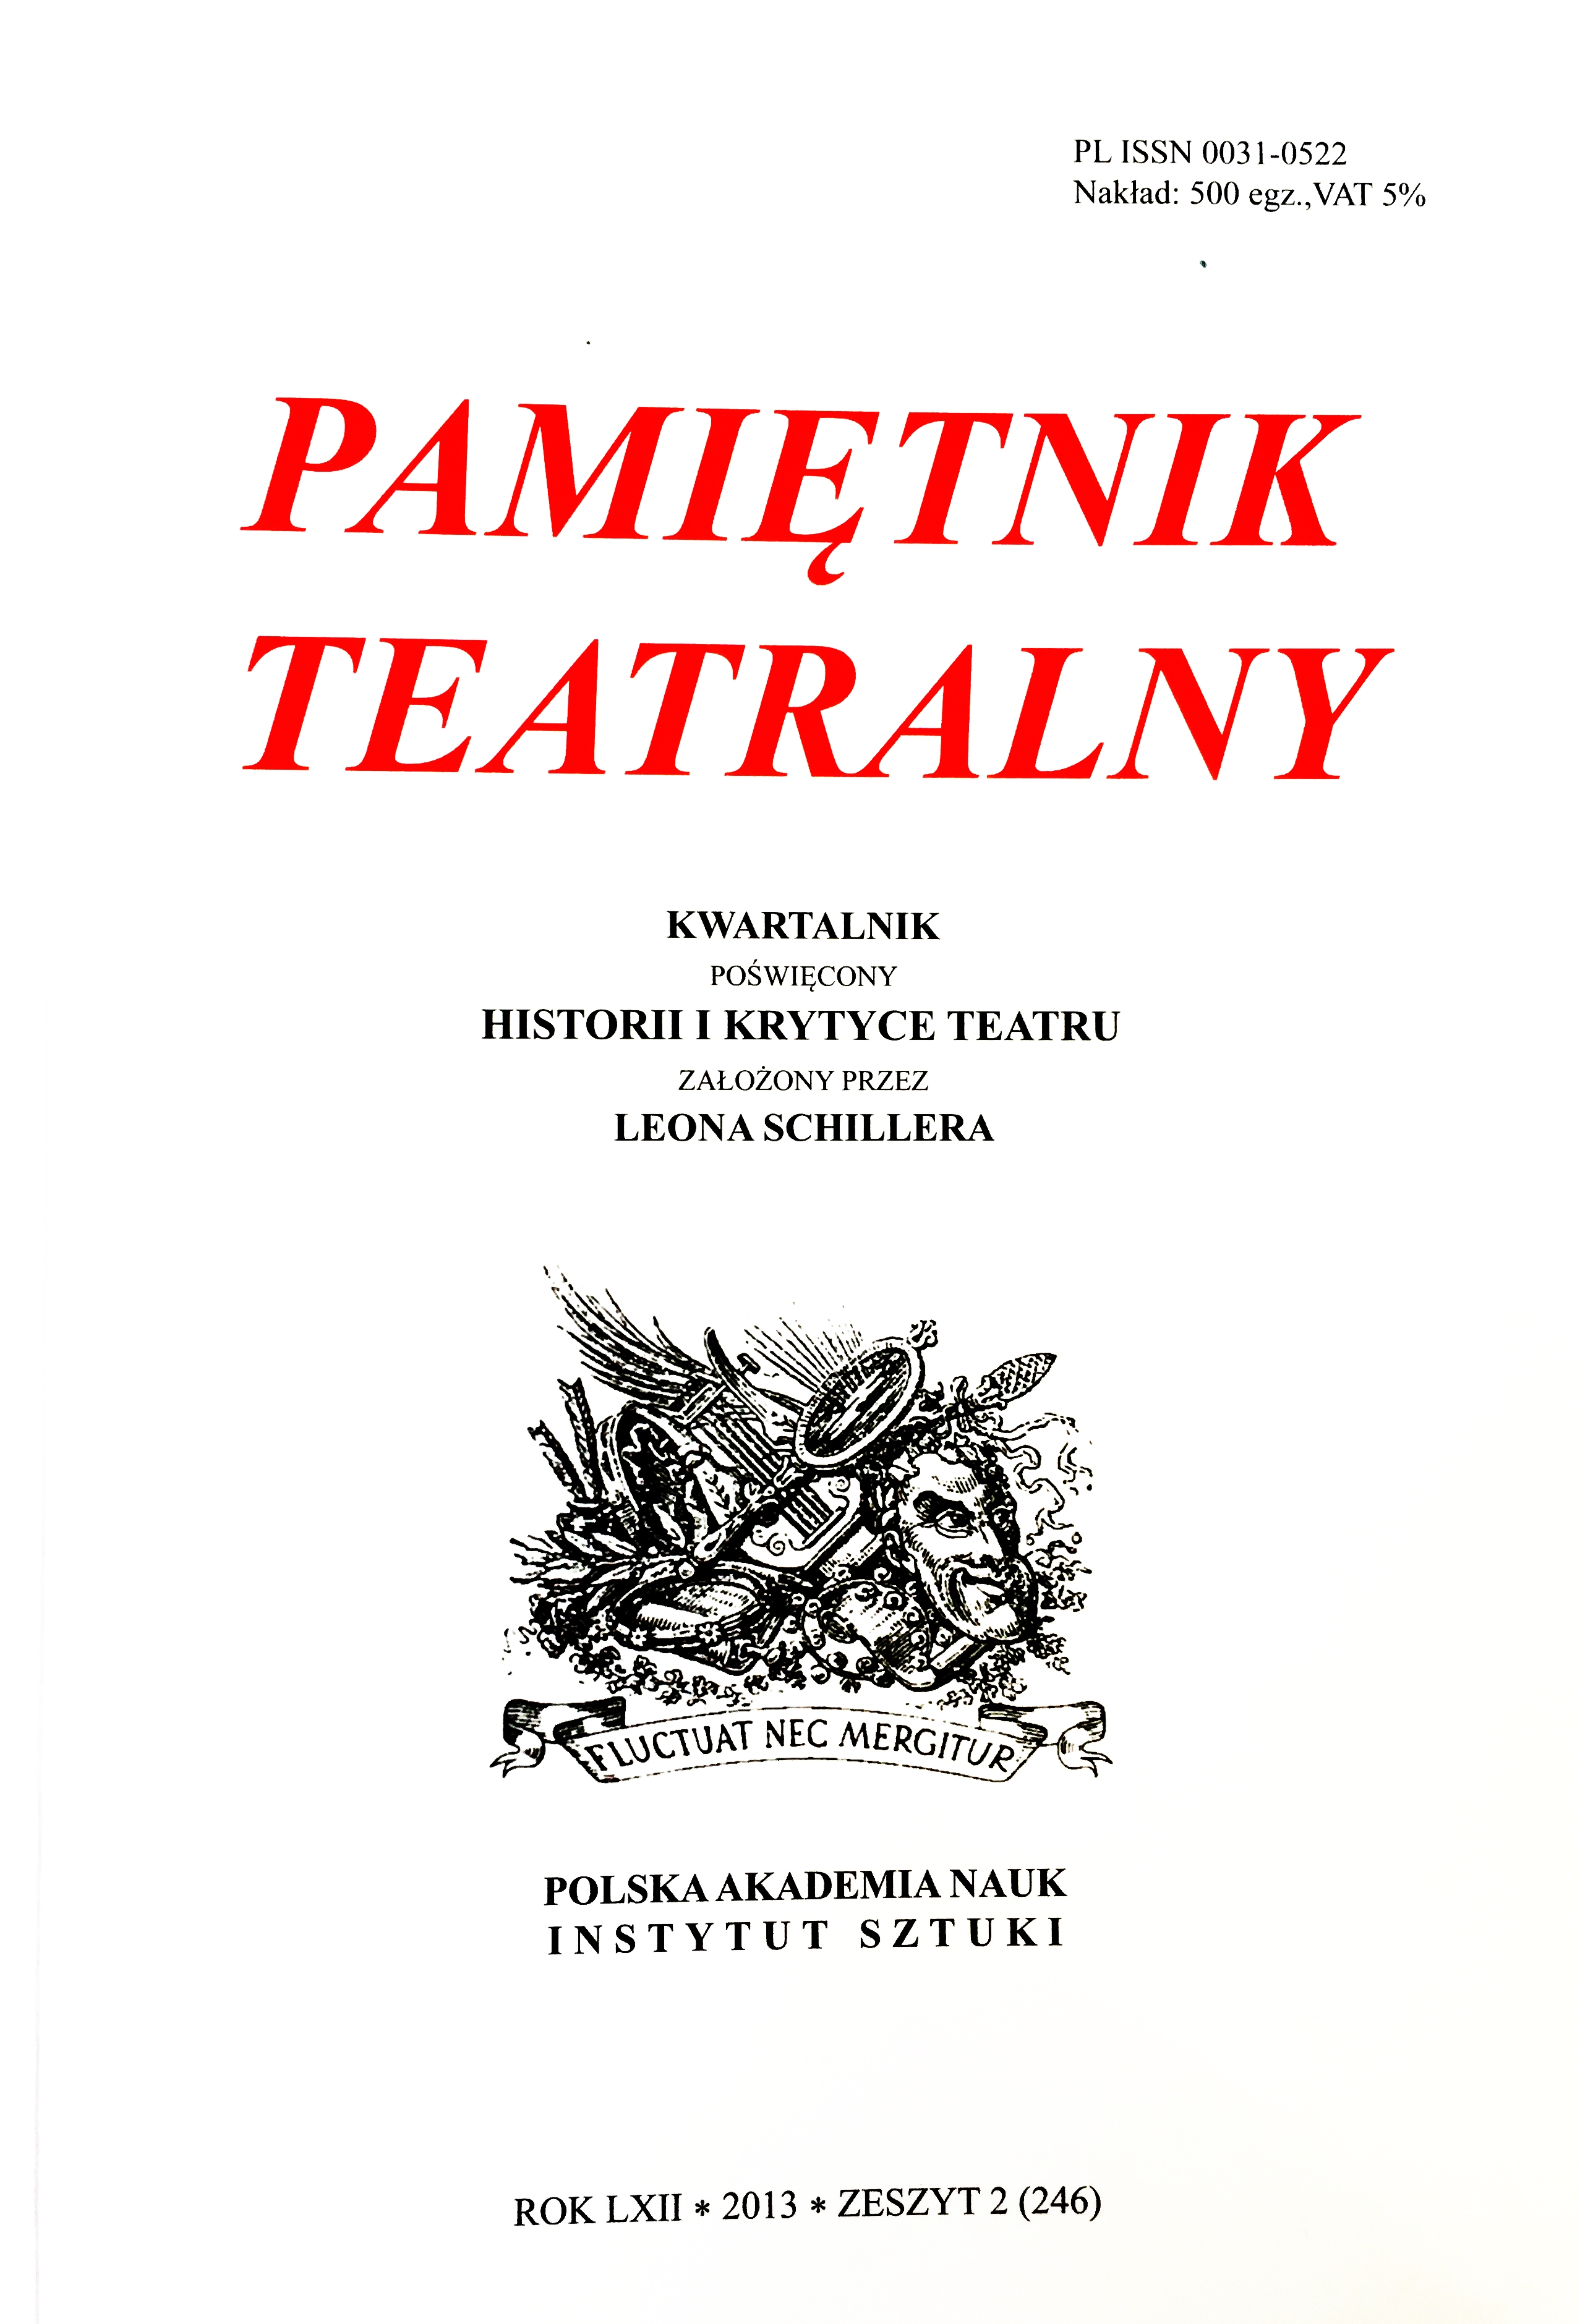 Directing at the Turn of the 18th and 19th Centuries and Wojciech Bogusławski’s Theatre Productions Cover Image